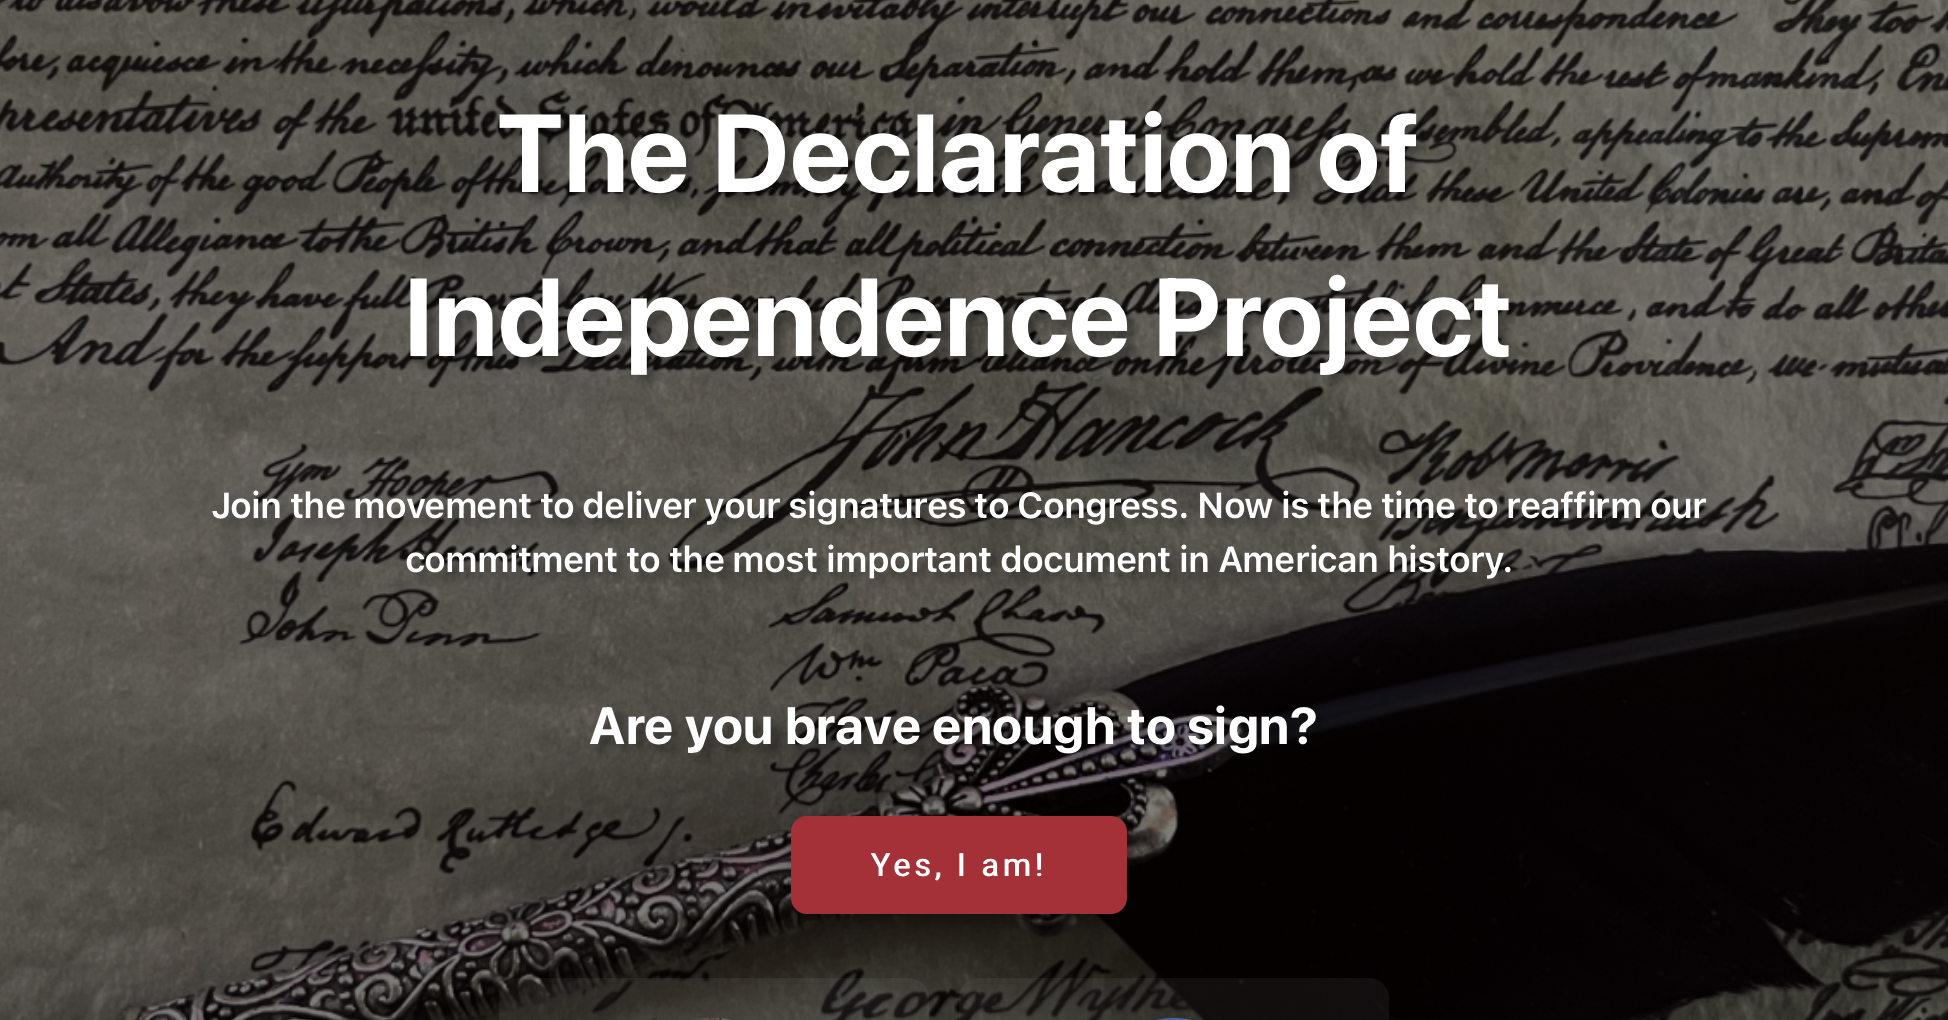 The Declarationof Independence Project